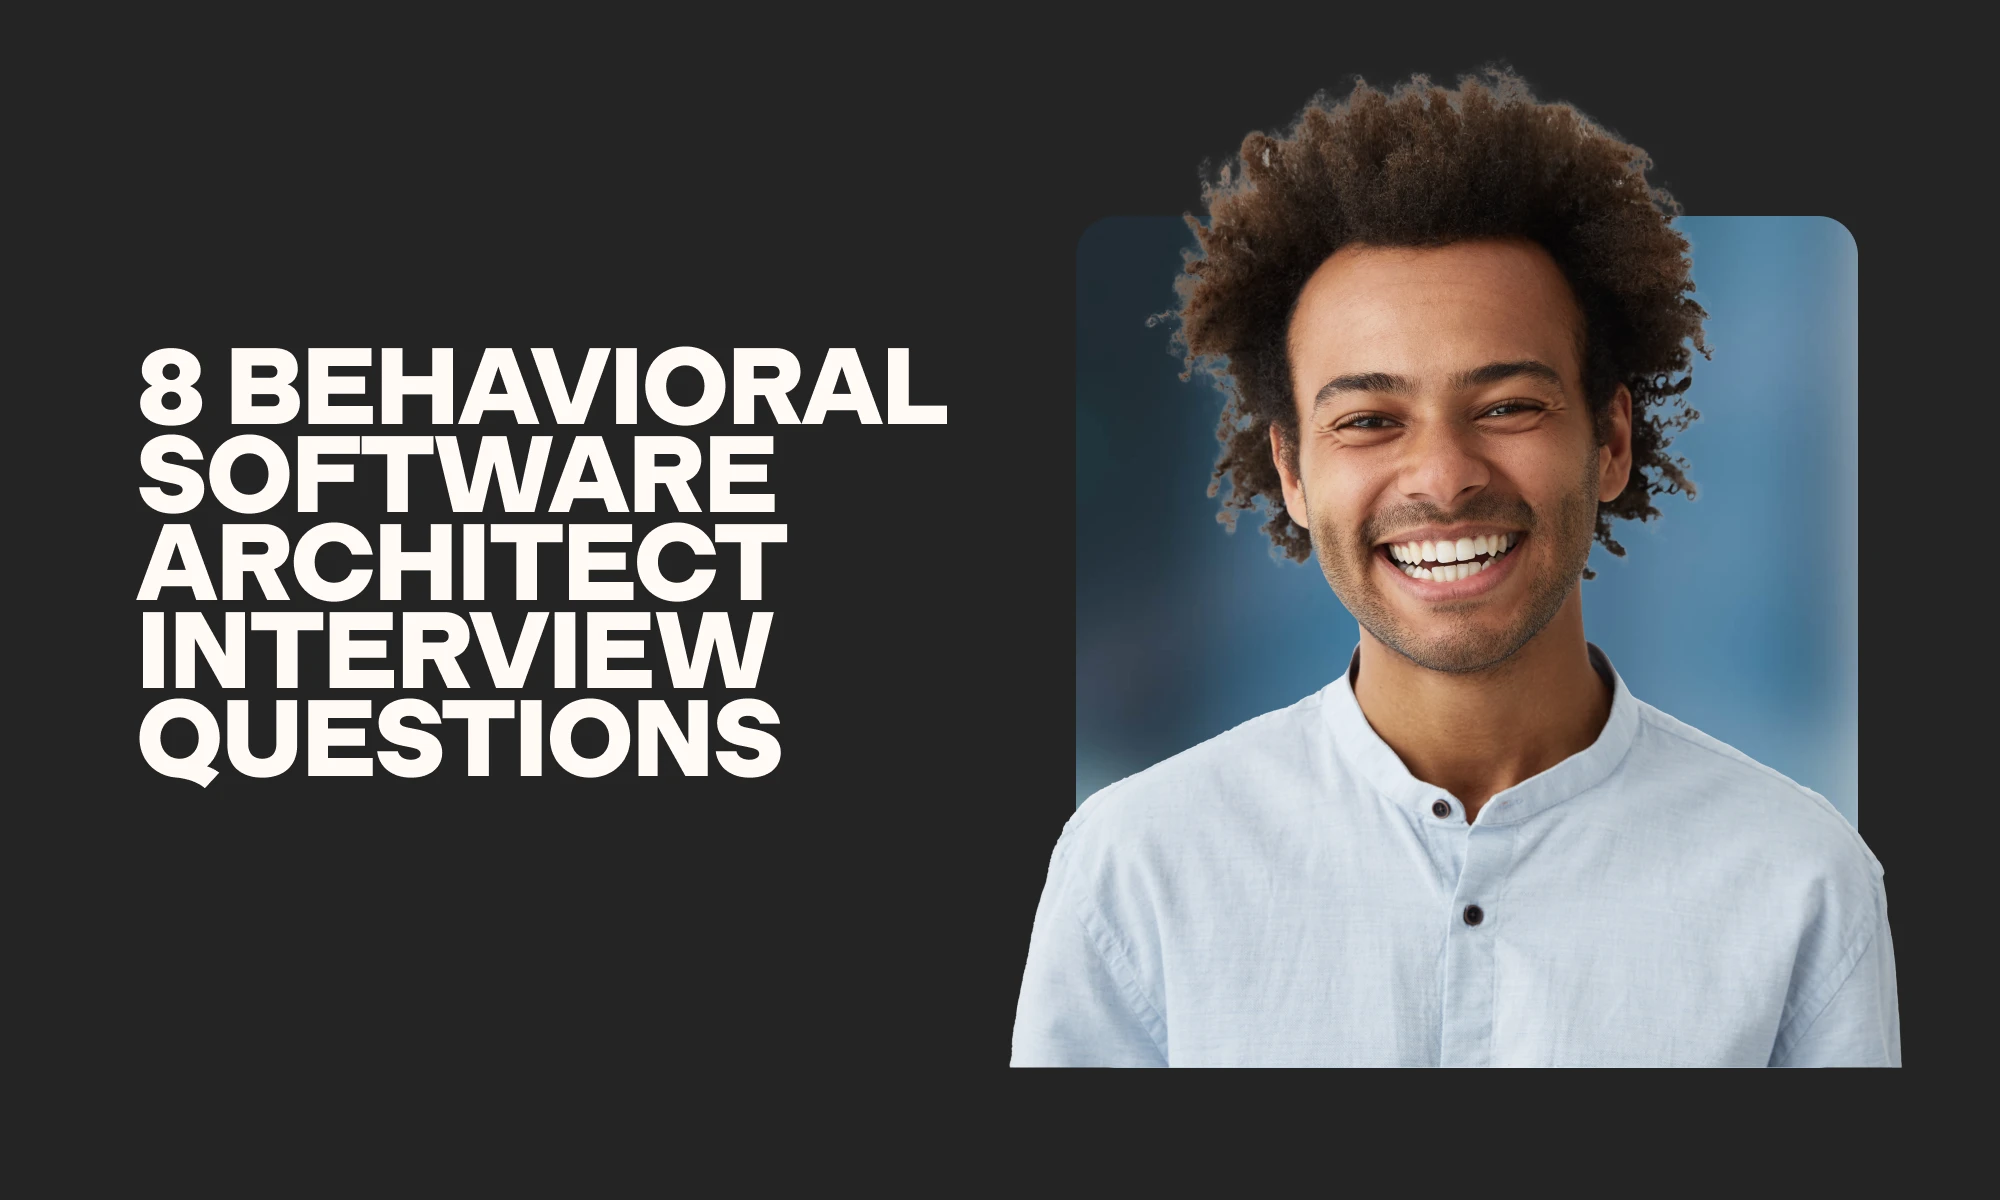 image showing 8 behavioral software architect interview questions